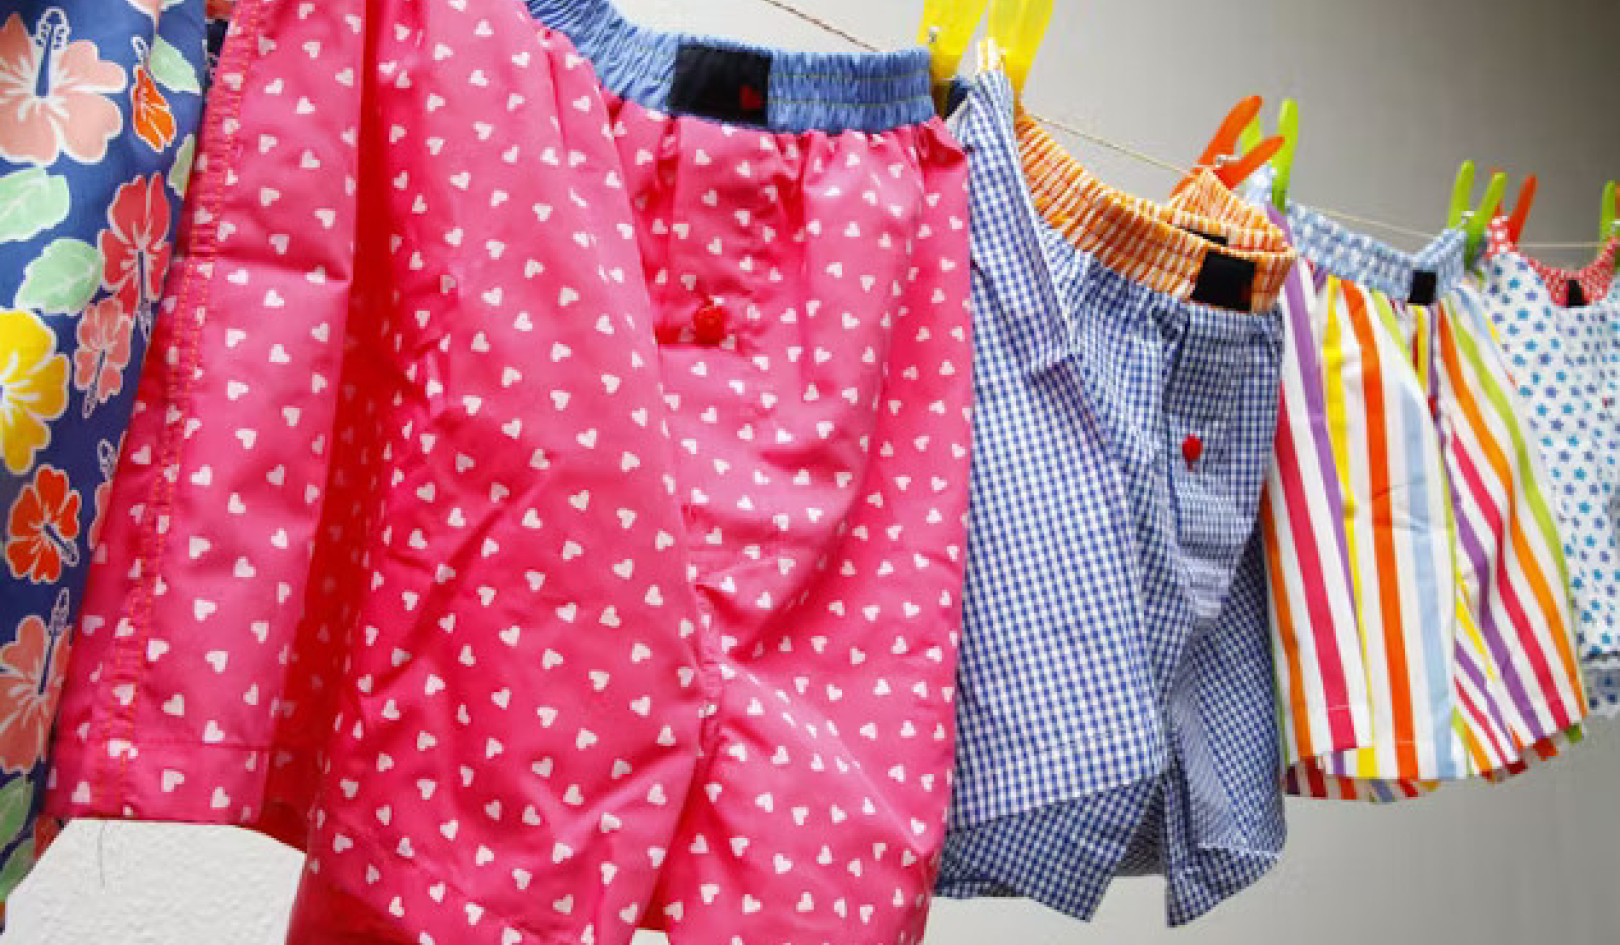 Choosing the Right Underwear for Your Health